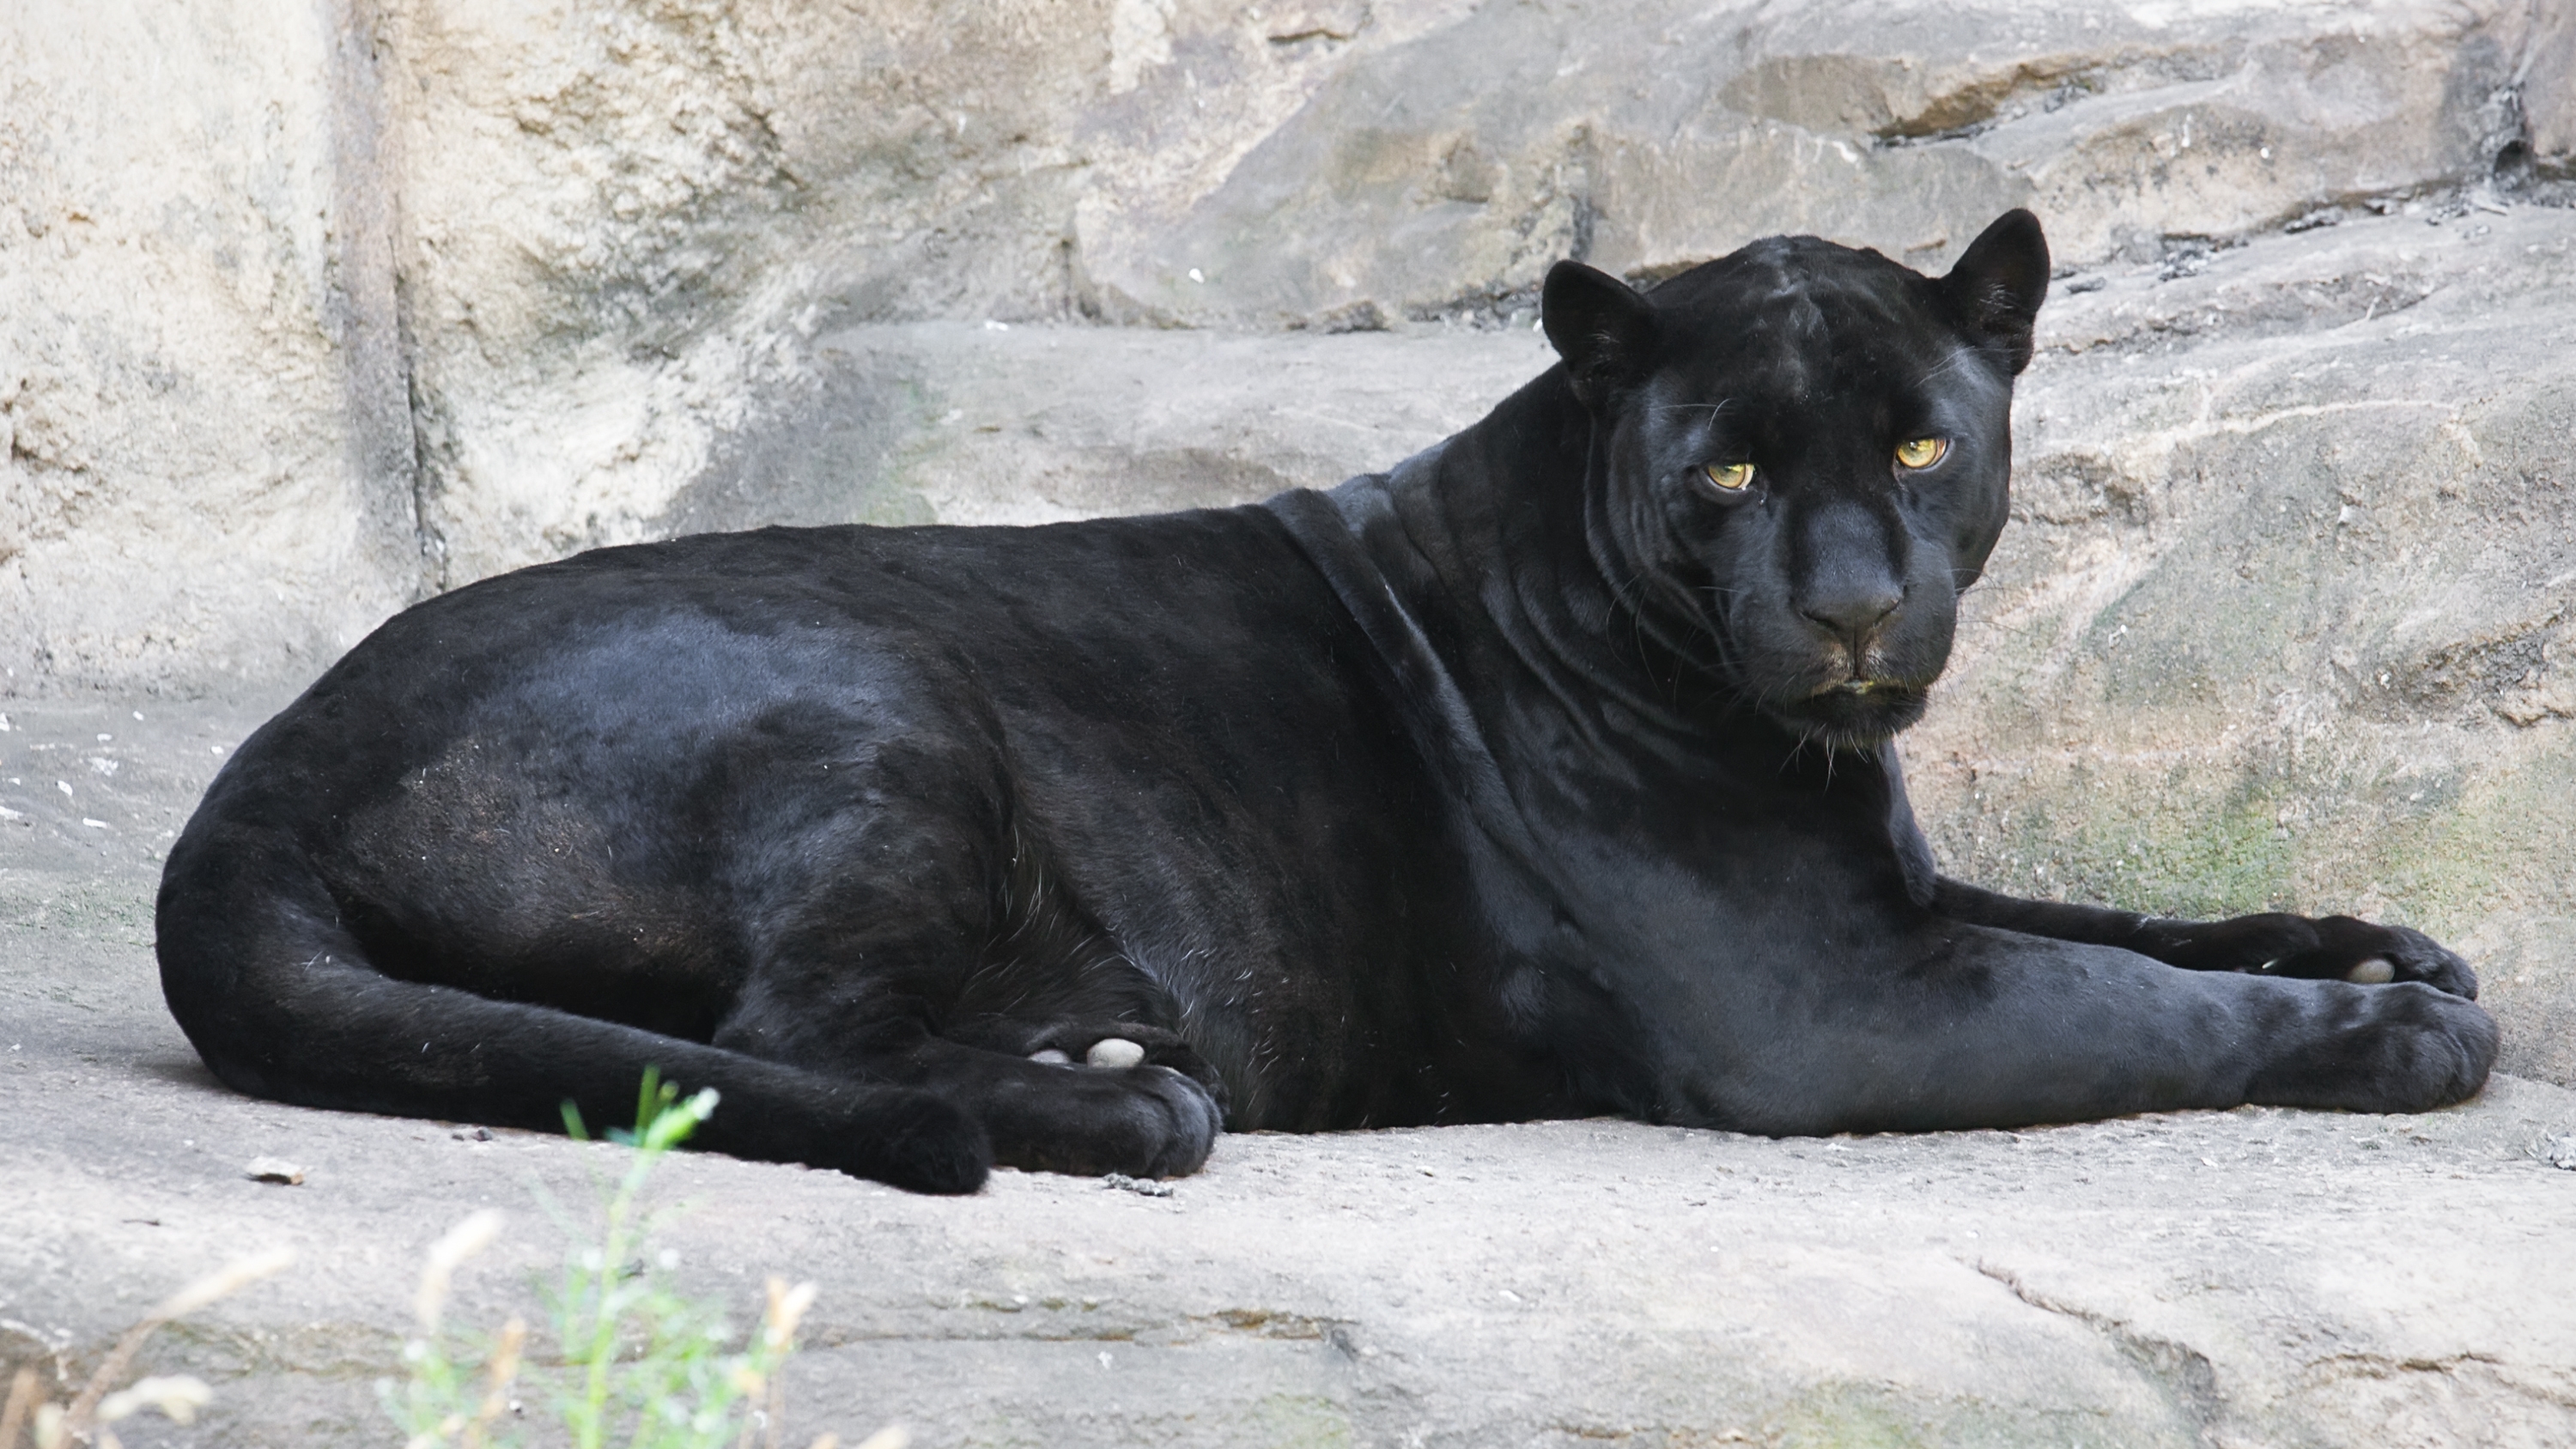 An Exclusive Interview With the Jaguar from the Arizona Zoo